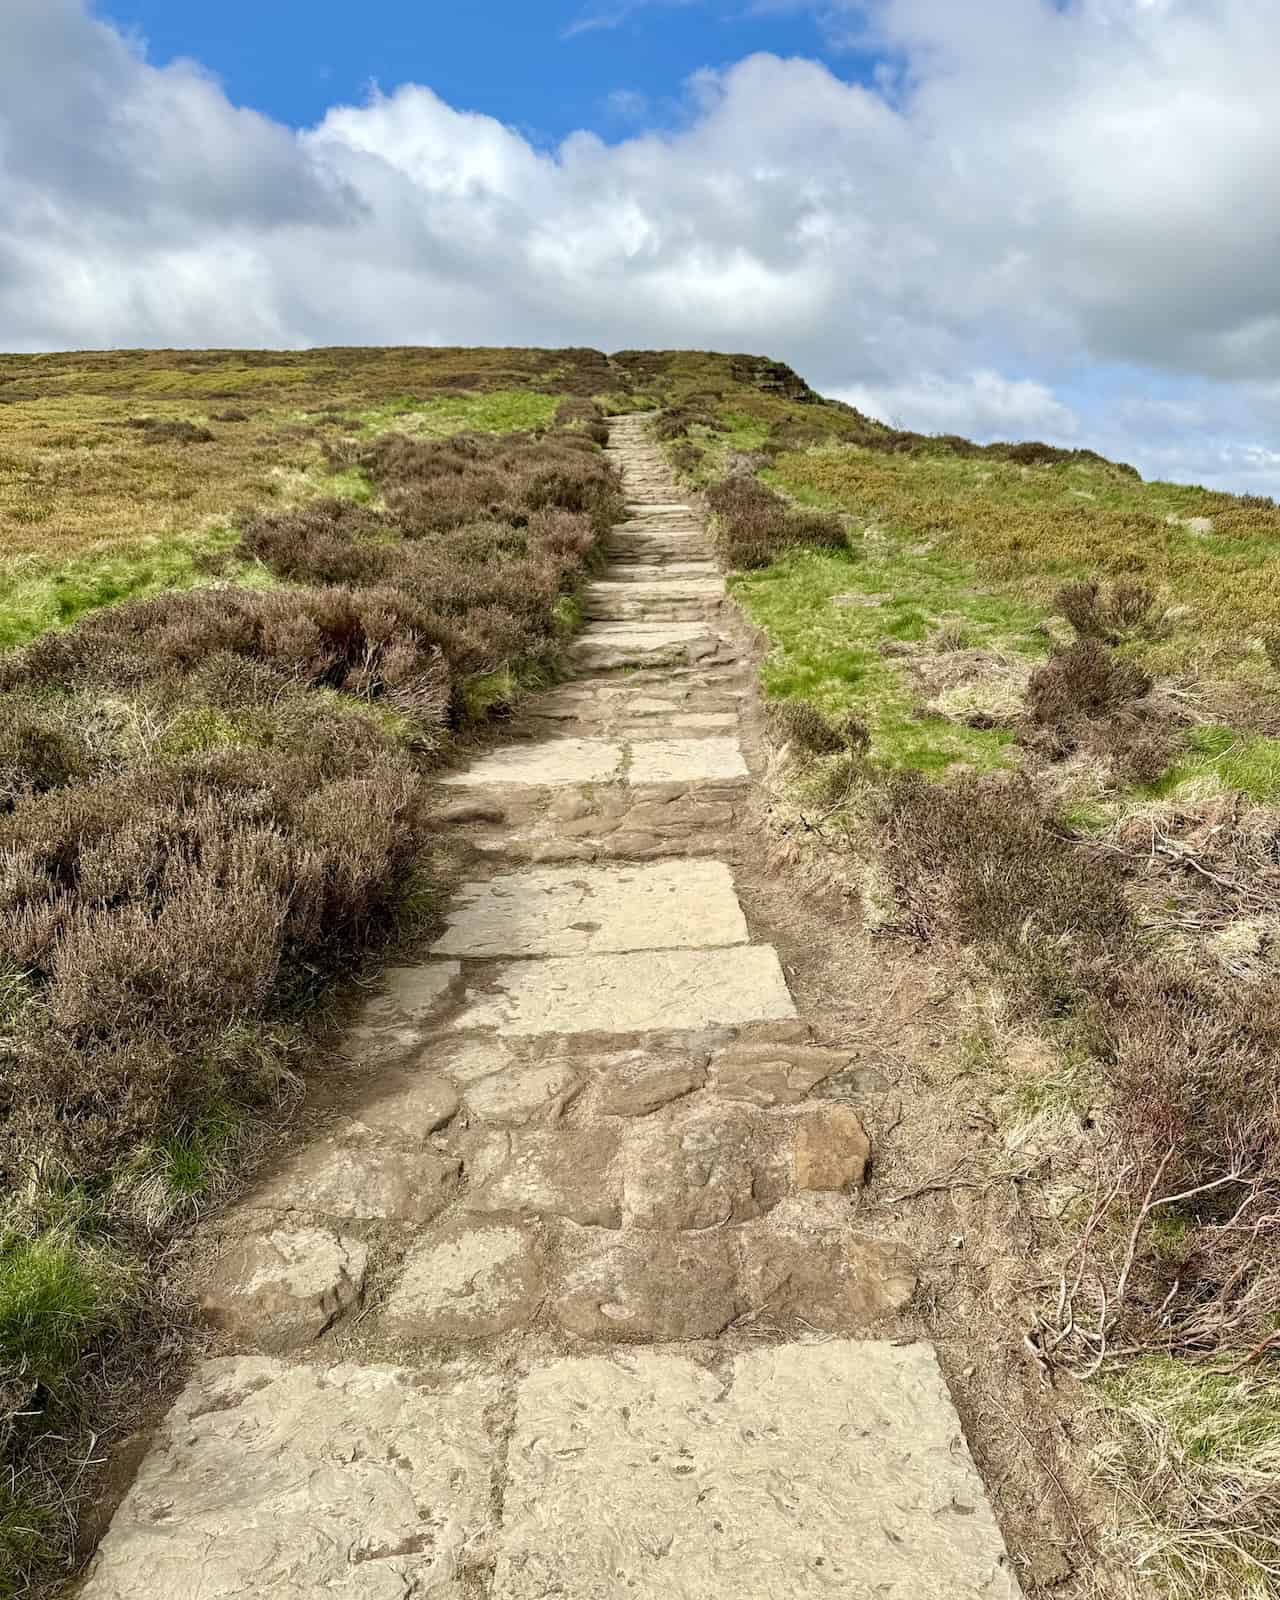 After the ascent, the path across the top of Kirby Bank is well-paved with large flagstones, making it easy to walk along. We continue following the Cleveland Way west. The Cleveland Way skirts the northern side of the true summit of Cringle Moor, known as Drake Howe, which stands at 432 metres (1417 feet).